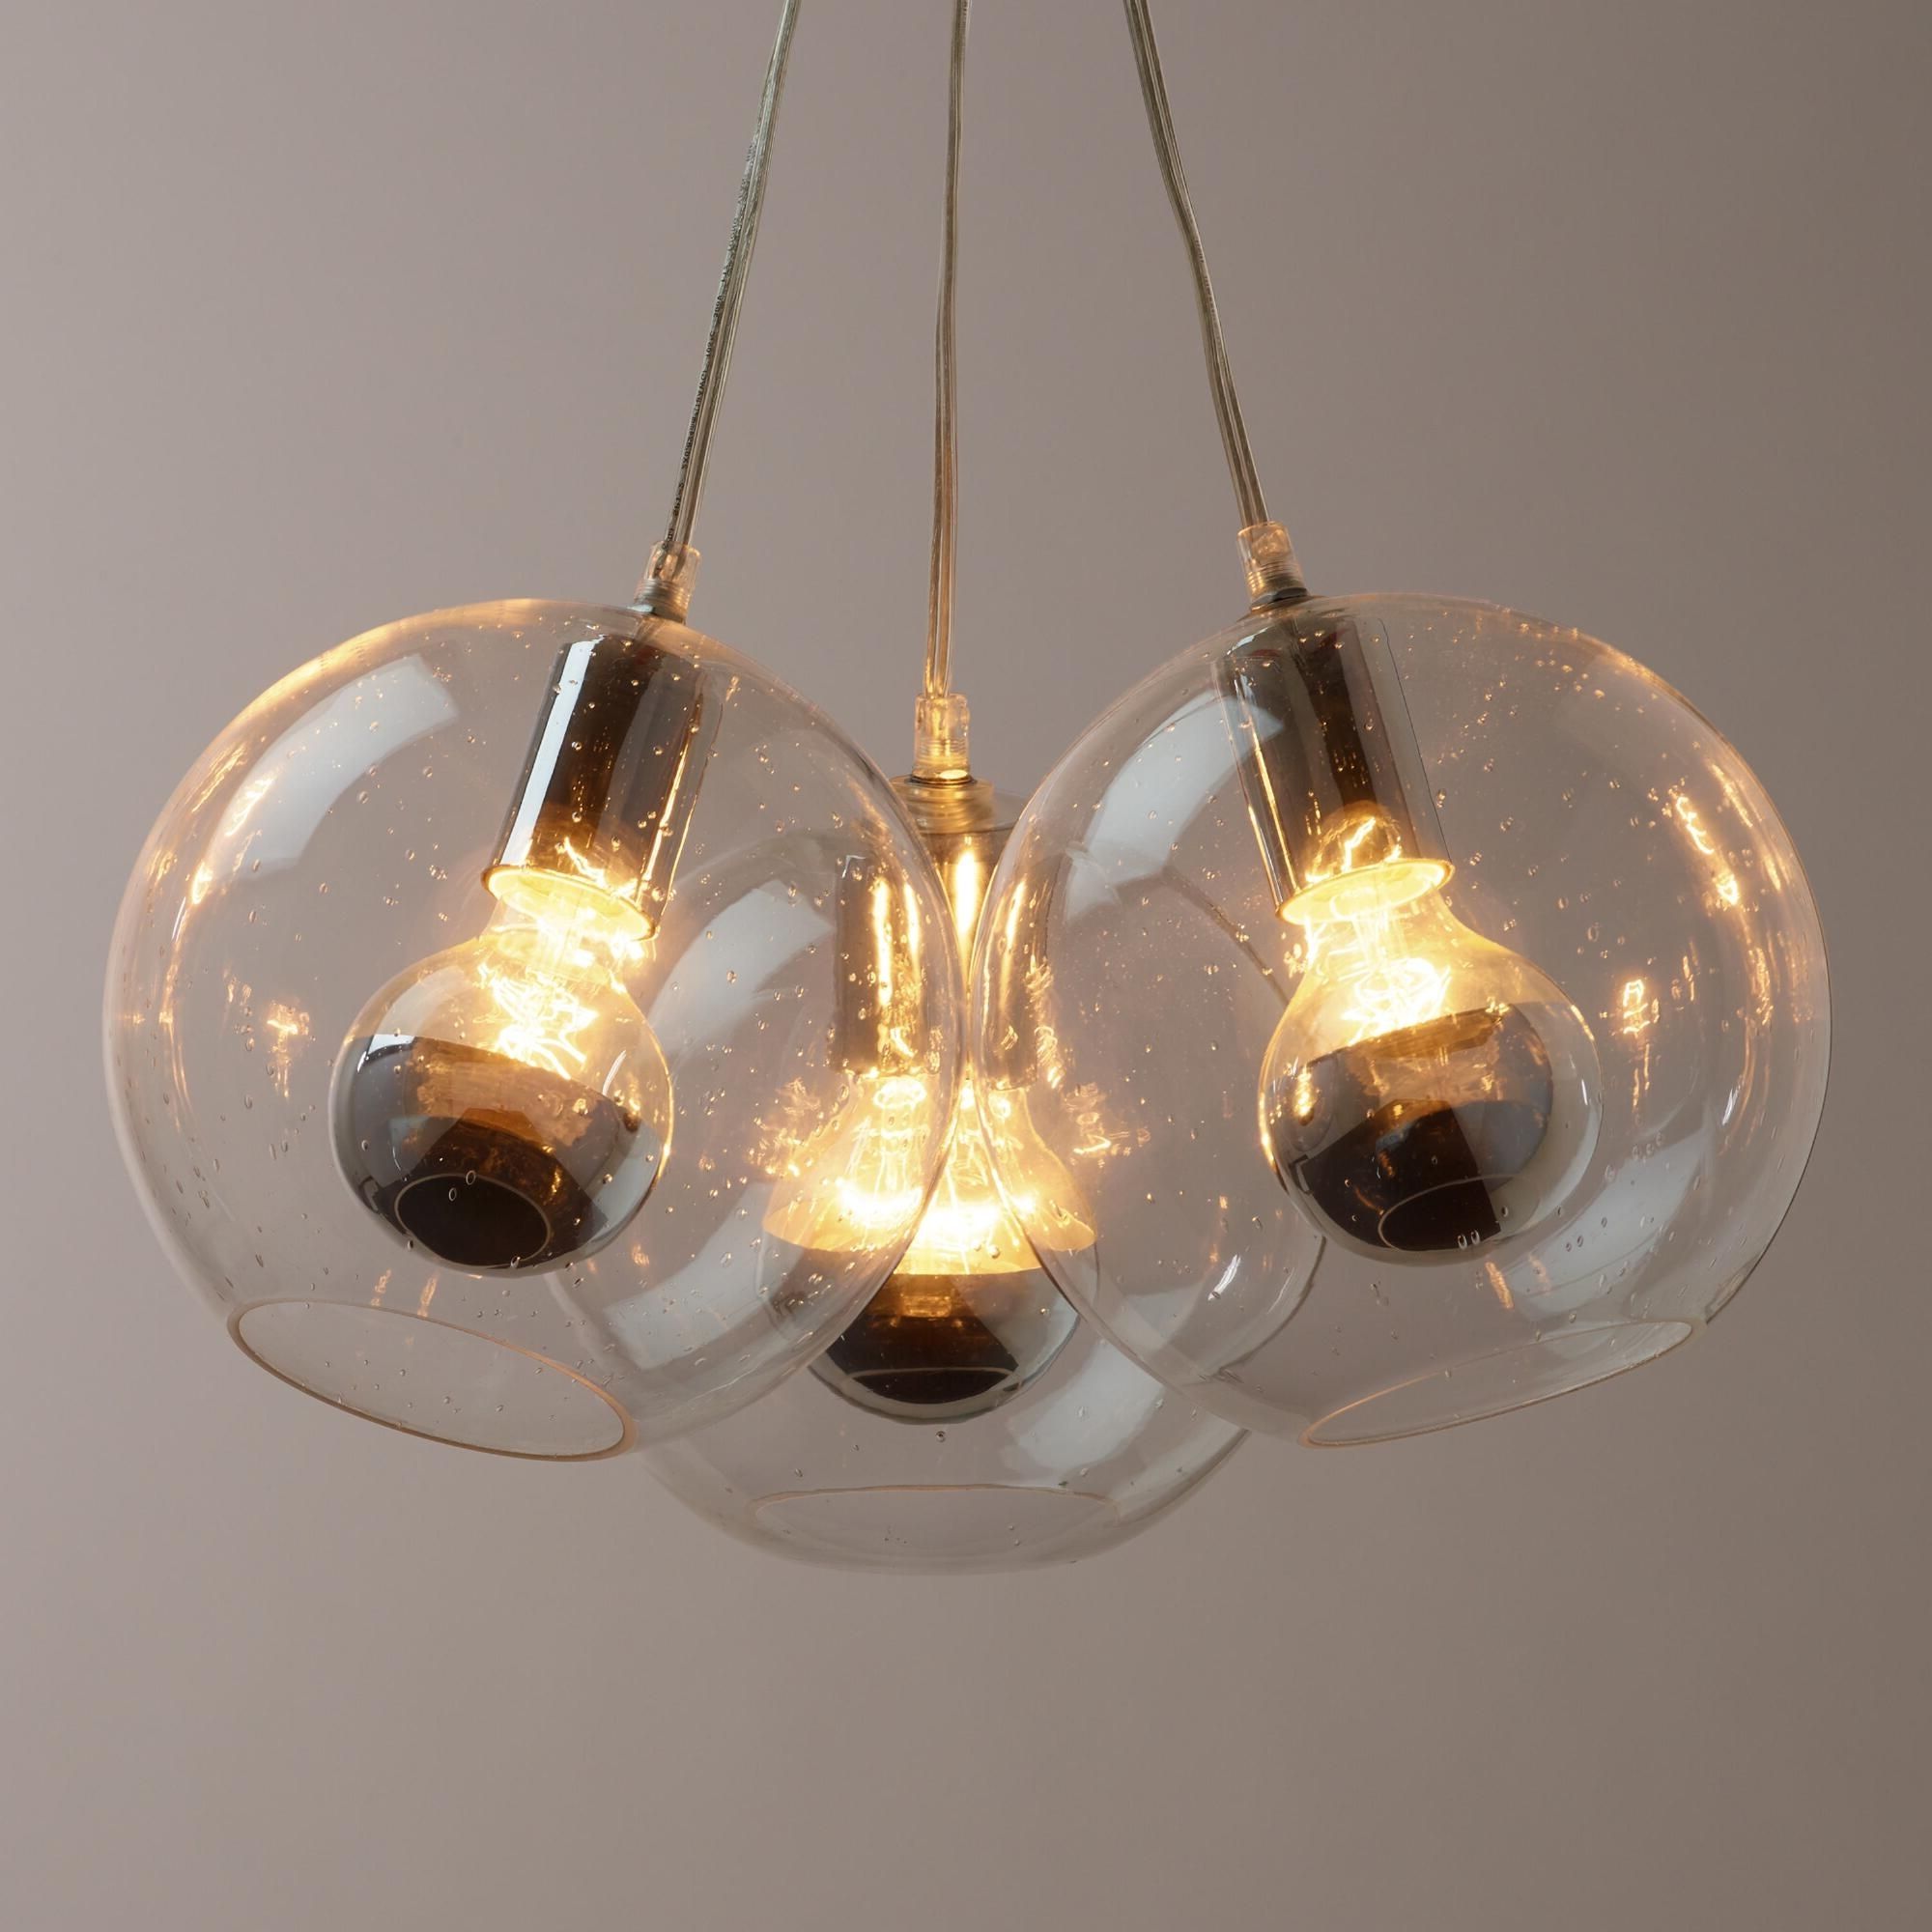 Well Liked Chrome And Glass Chandeliers In Light : Fascinating Seeded Glass Chrome Tip Bulb Cluster Pendant (View 15 of 15)